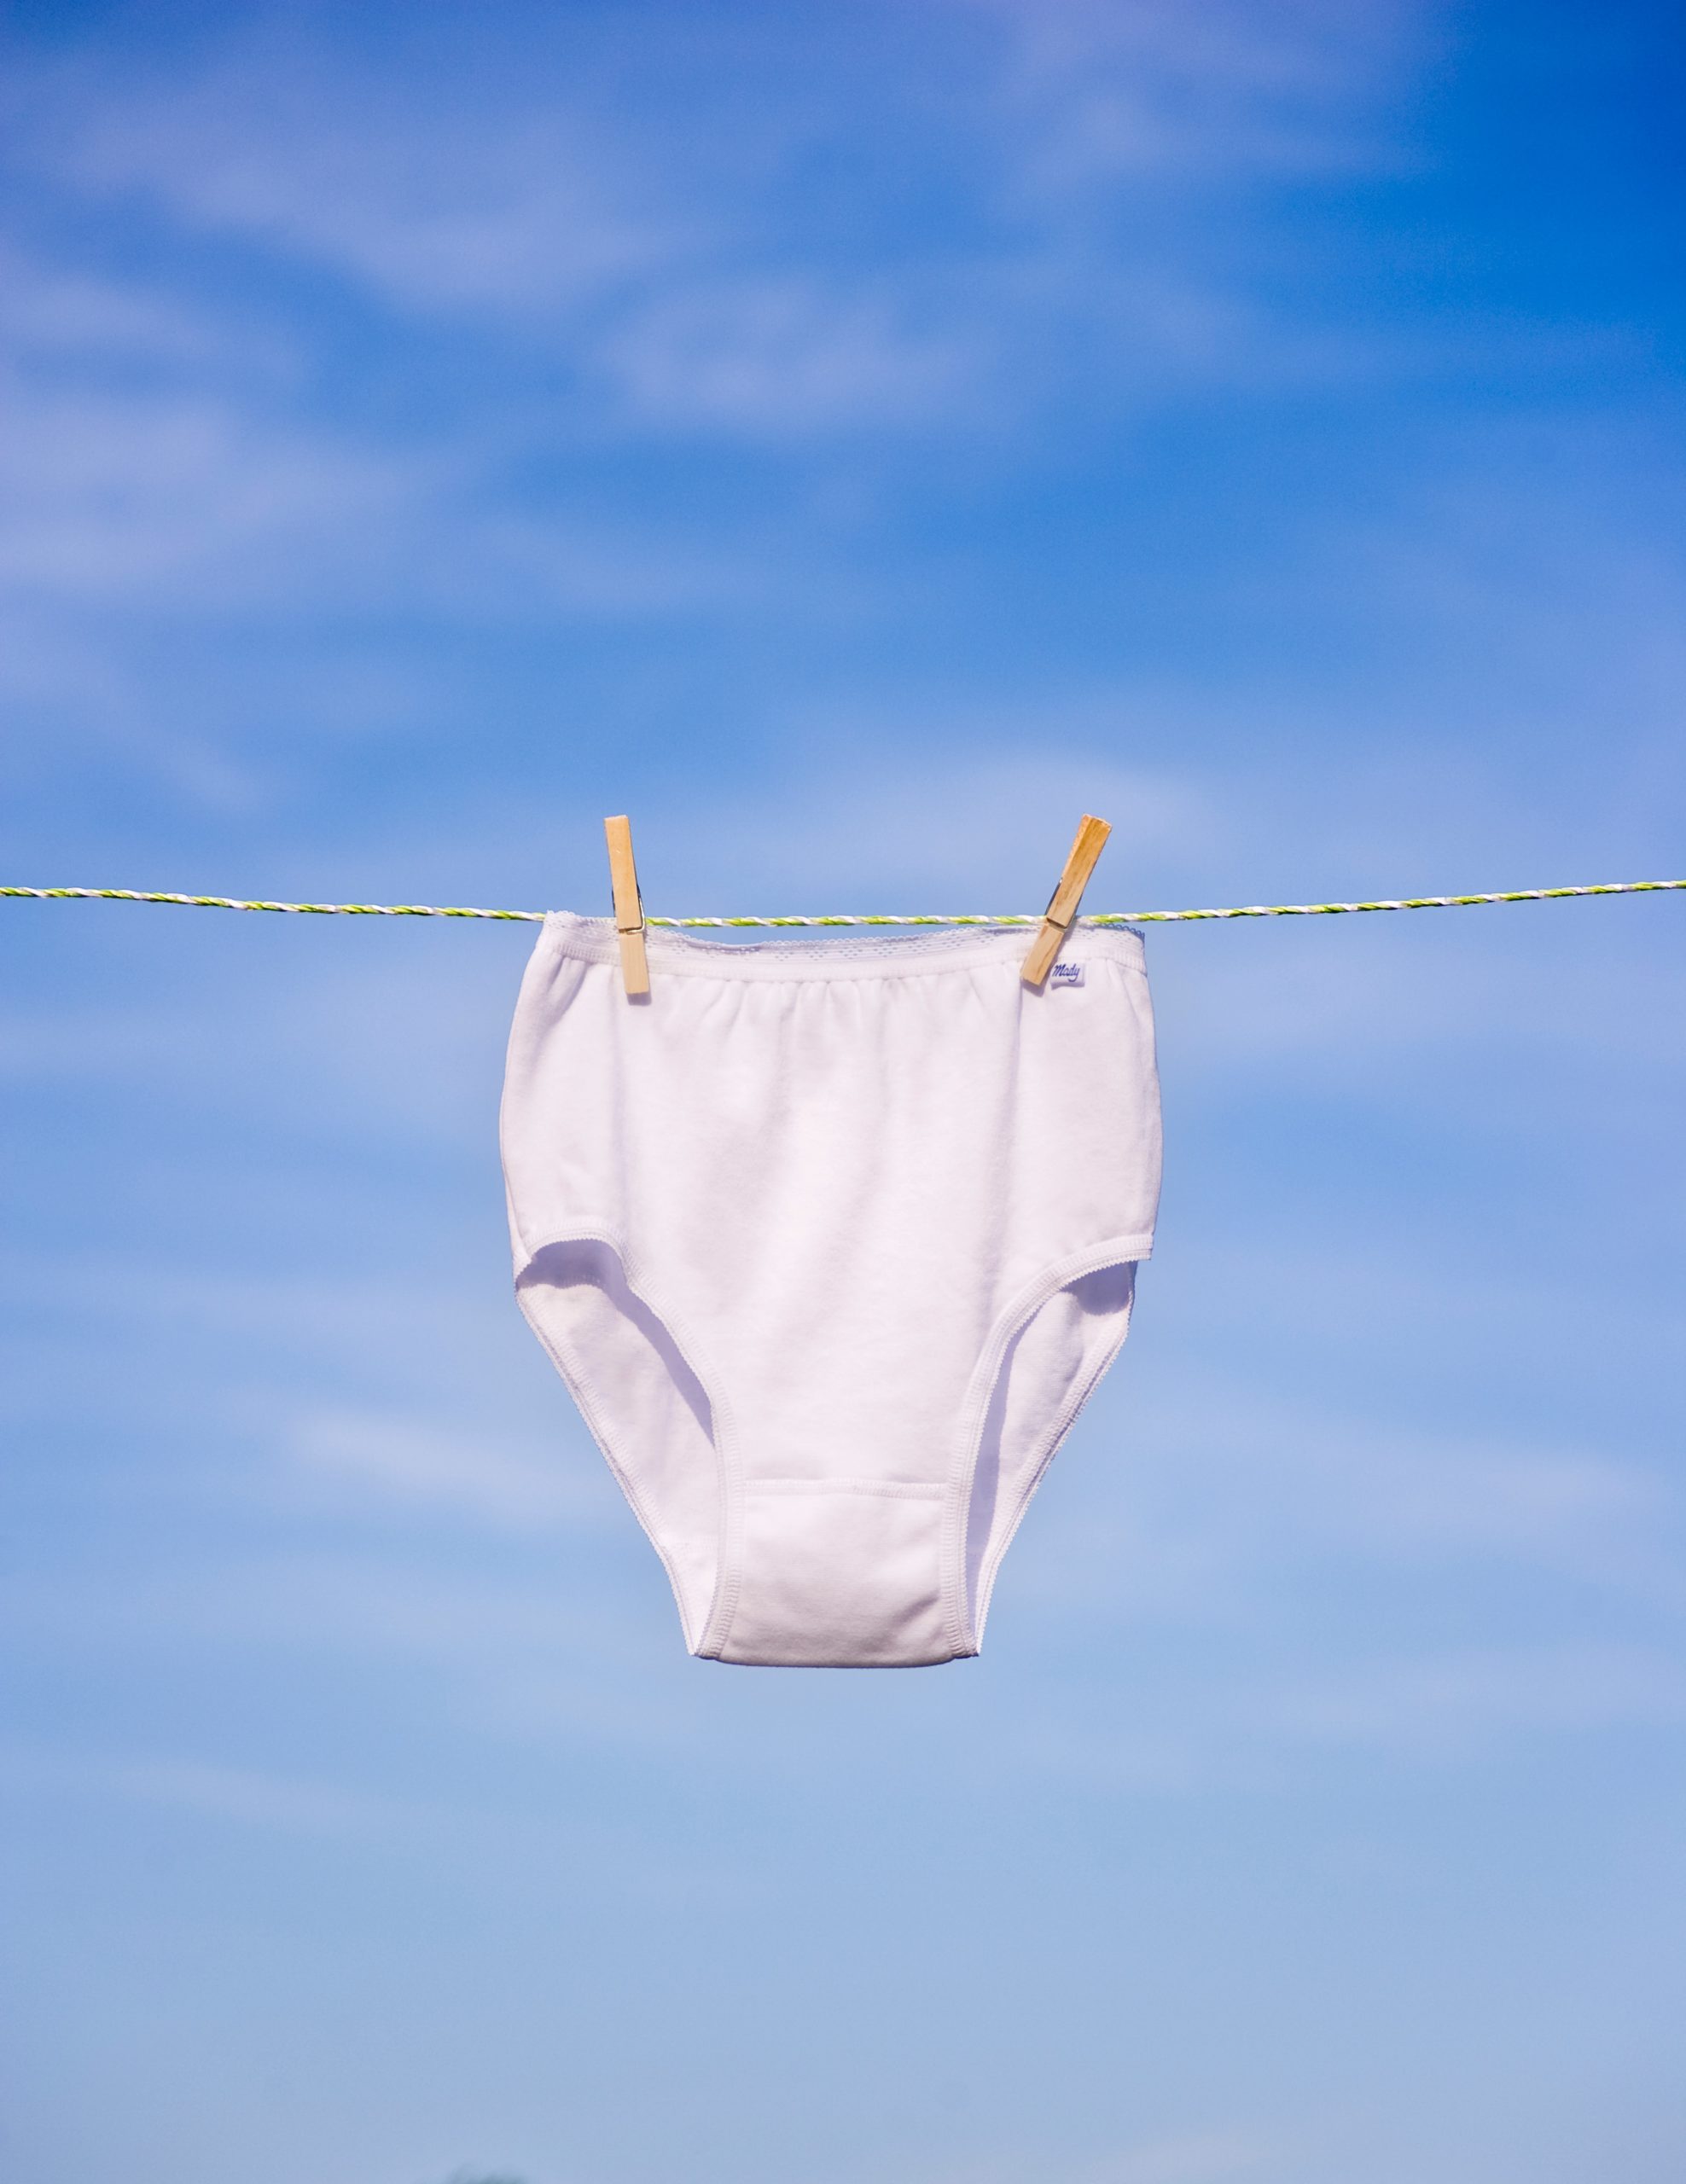 pinned and hanged white underwear